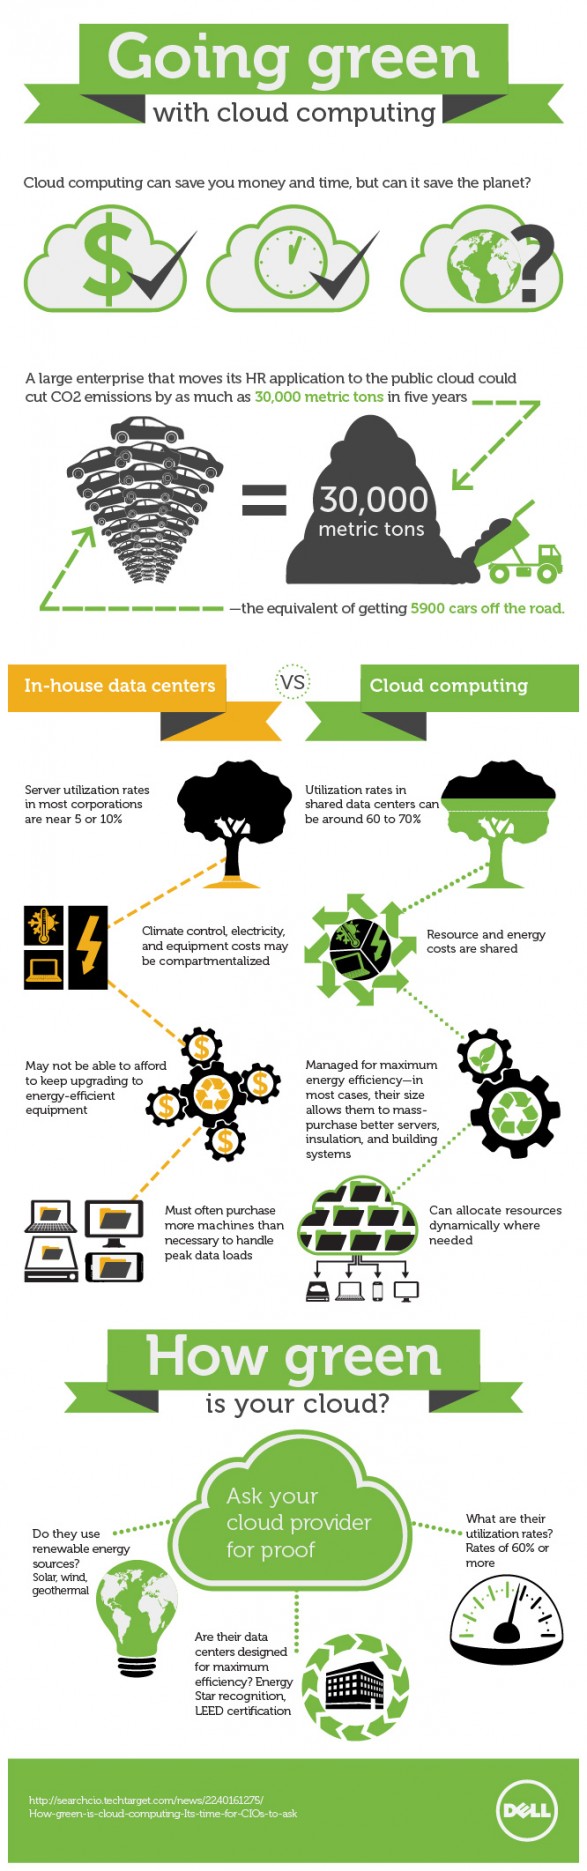 Going green with cloud computing